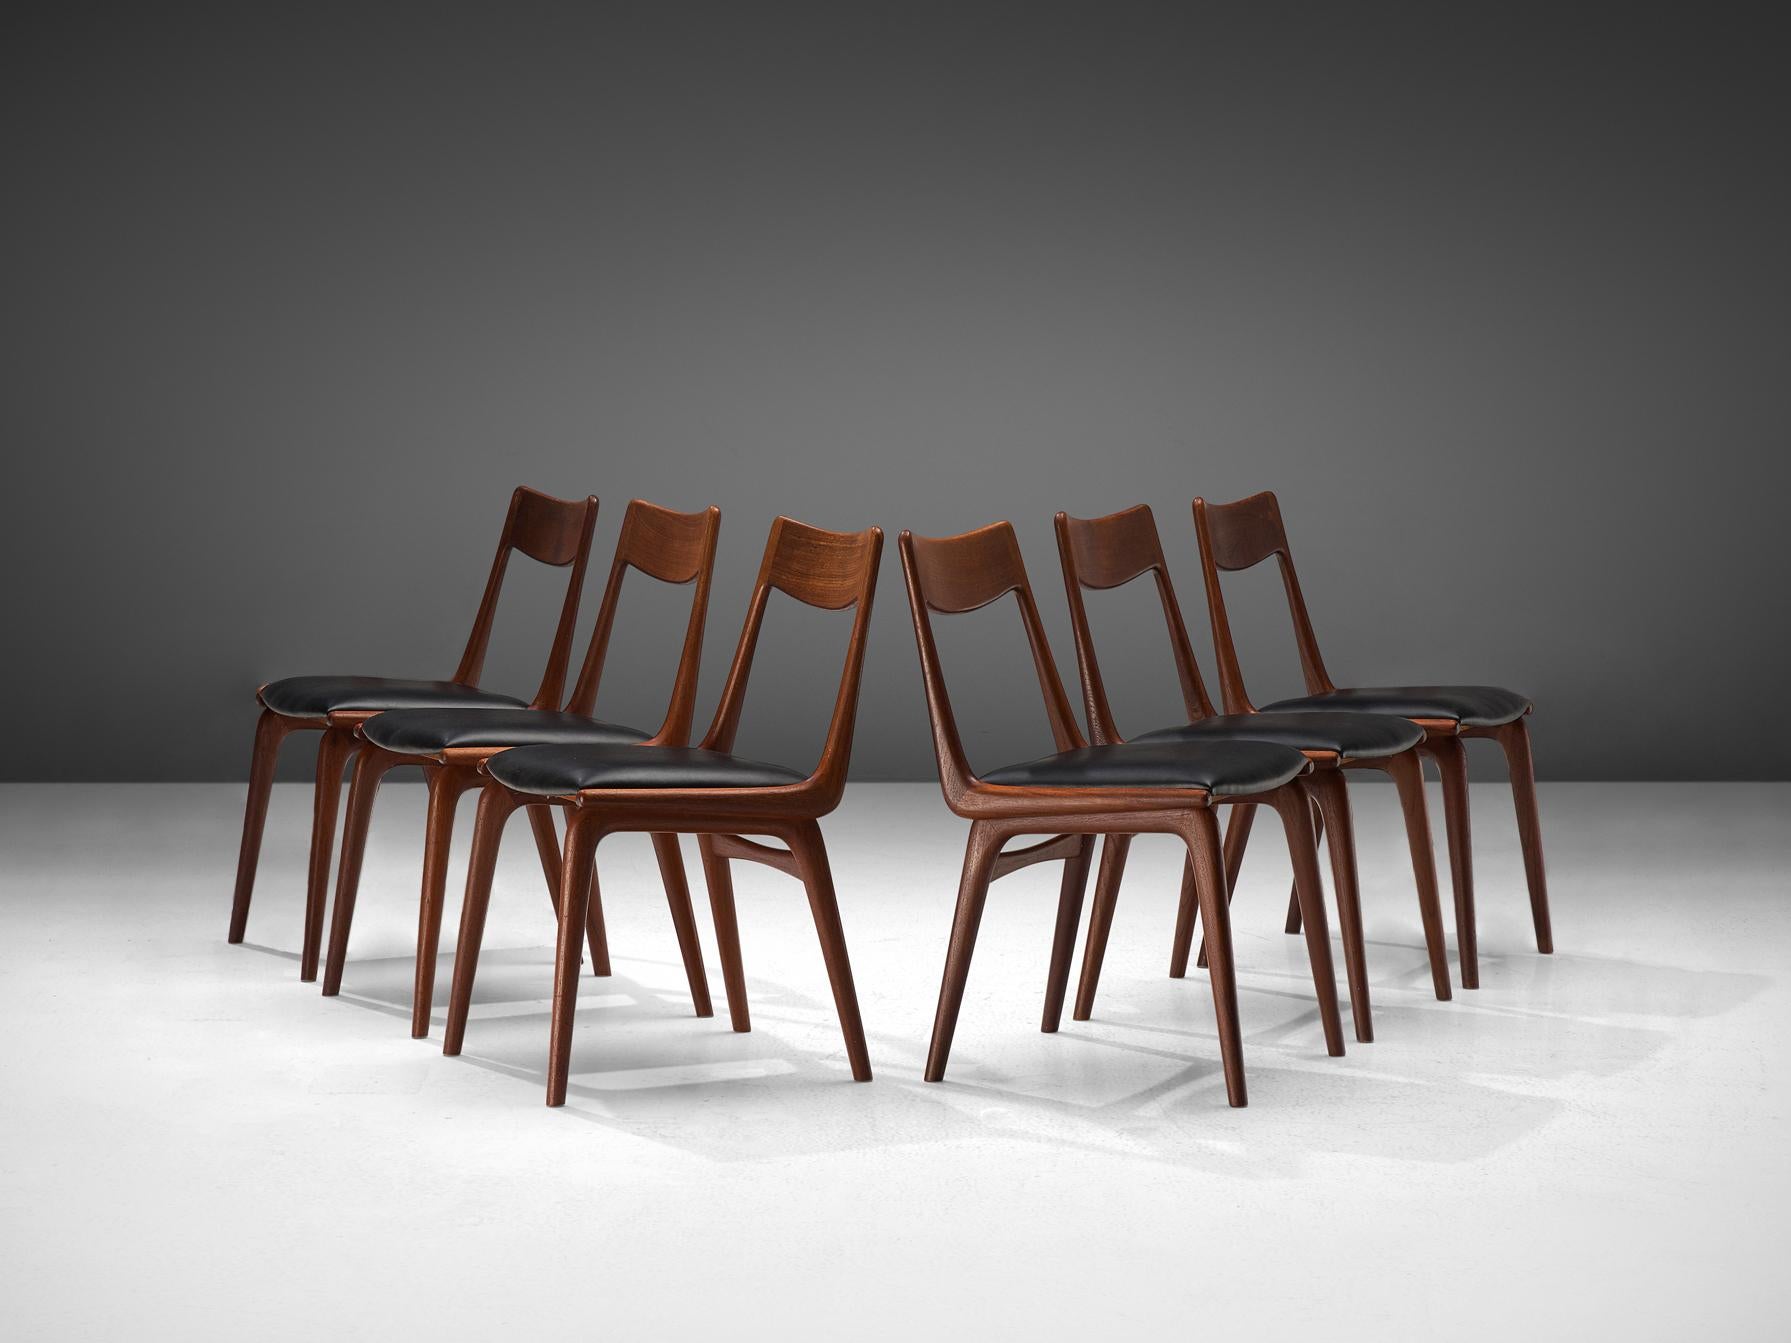 Alfred Christensen for Slagelse Møbelvaerk, set of six dining chairs model 370, teak, leatherette, Denmark, 1960s.

Elegant set of Danish dining chairs, featuring a teak frame. Seen from the side, the seat's frame that flows over to the backrest has